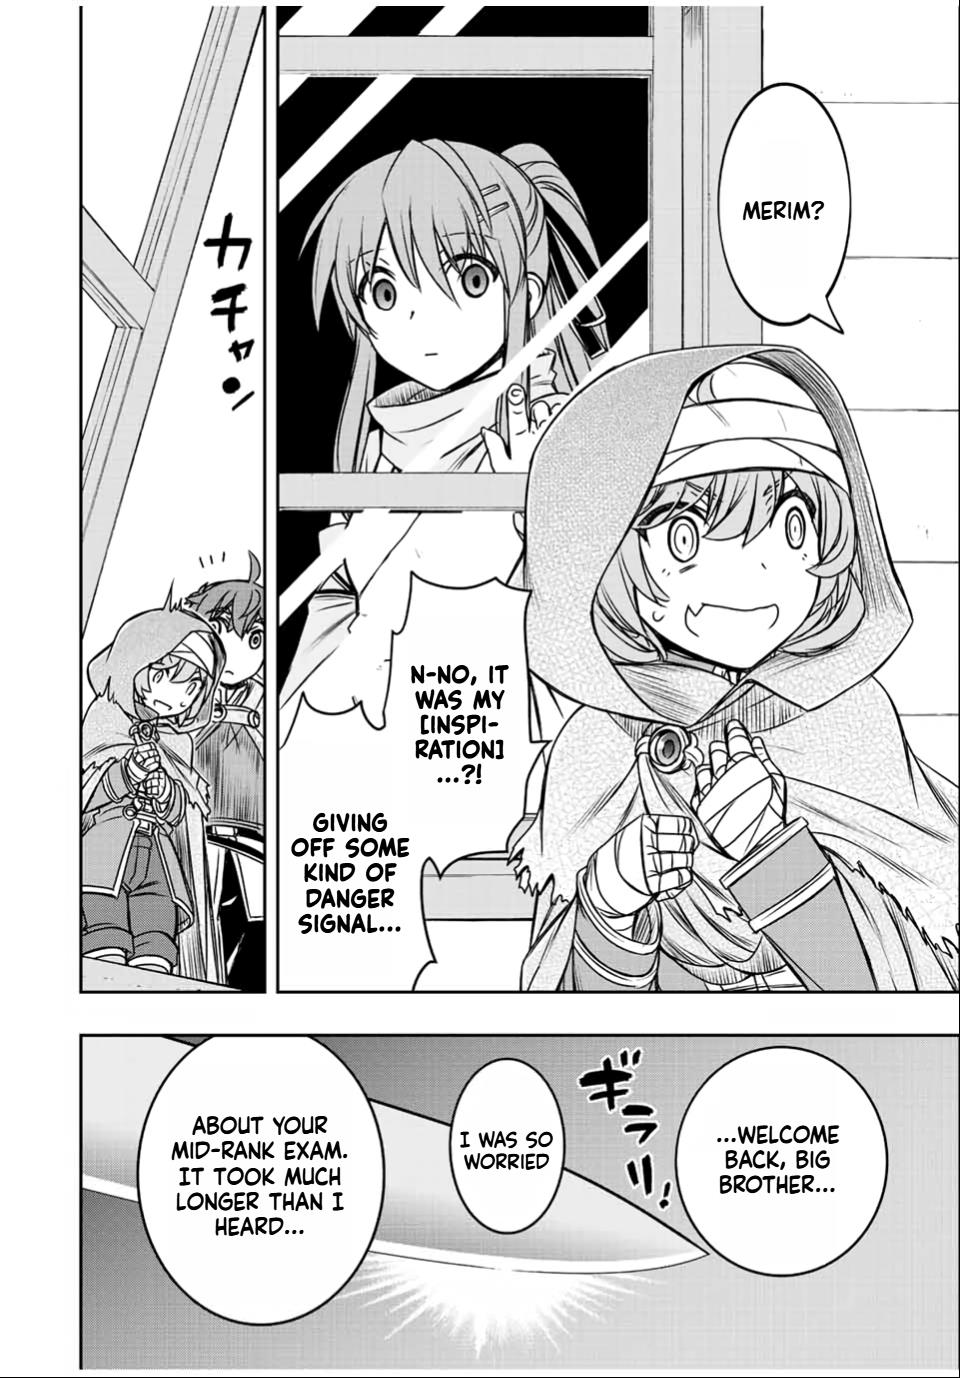 The Useless Skill [Auto Mode] Has Been Awakened ~Huh, Guild's Scout, Didn't You Say I Wasn't Needed Anymore?~ - Page 2